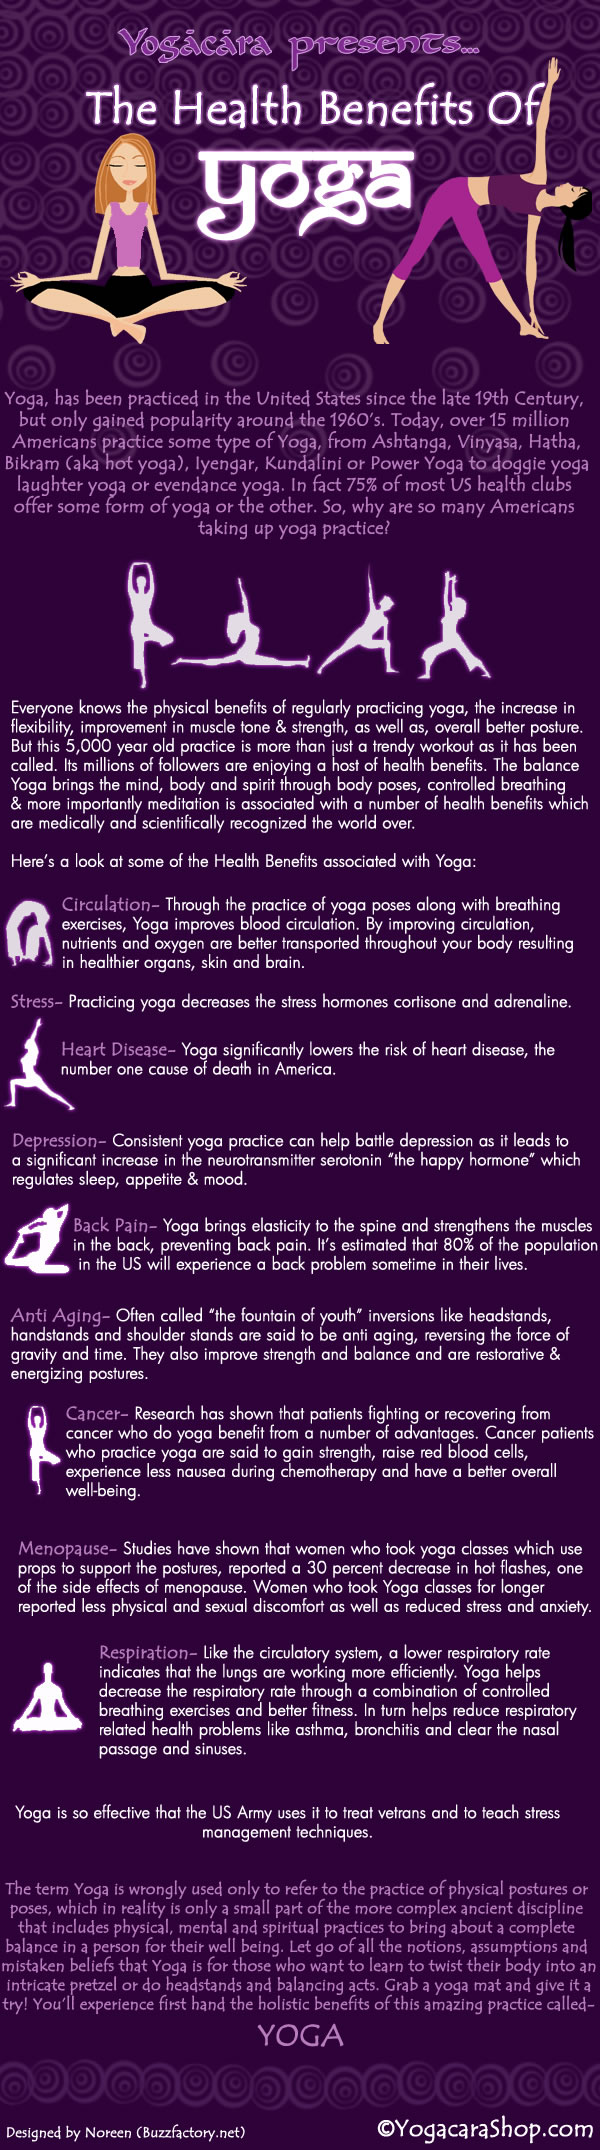 The-Health-Benefits-Of-Yoga-infographic